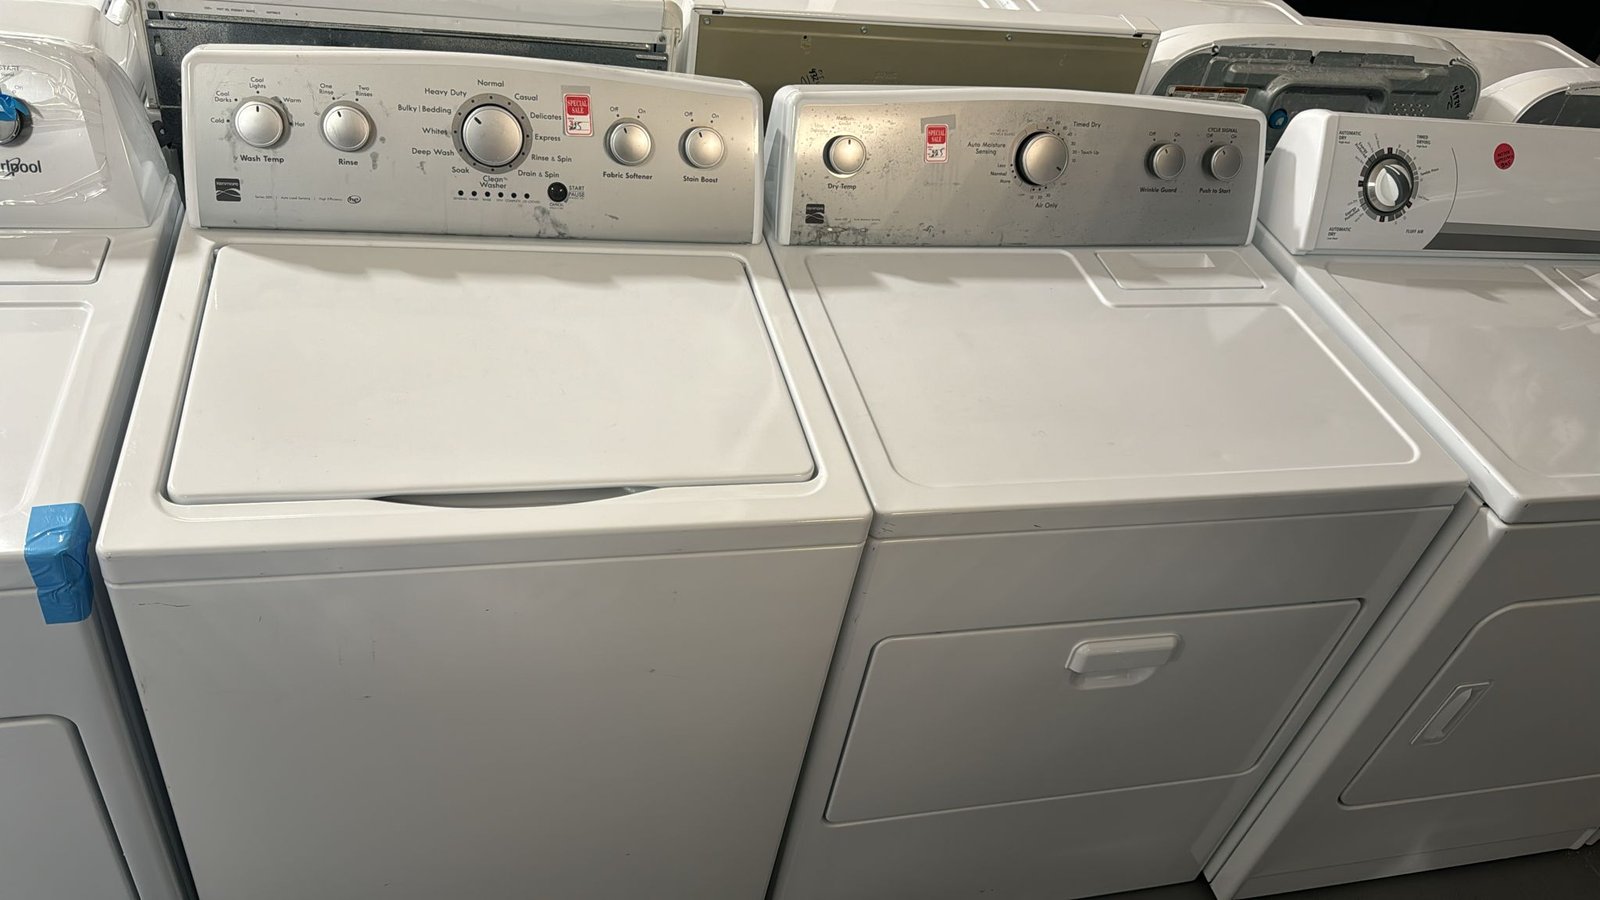 Kenmore Used Washer Dryer Set – White